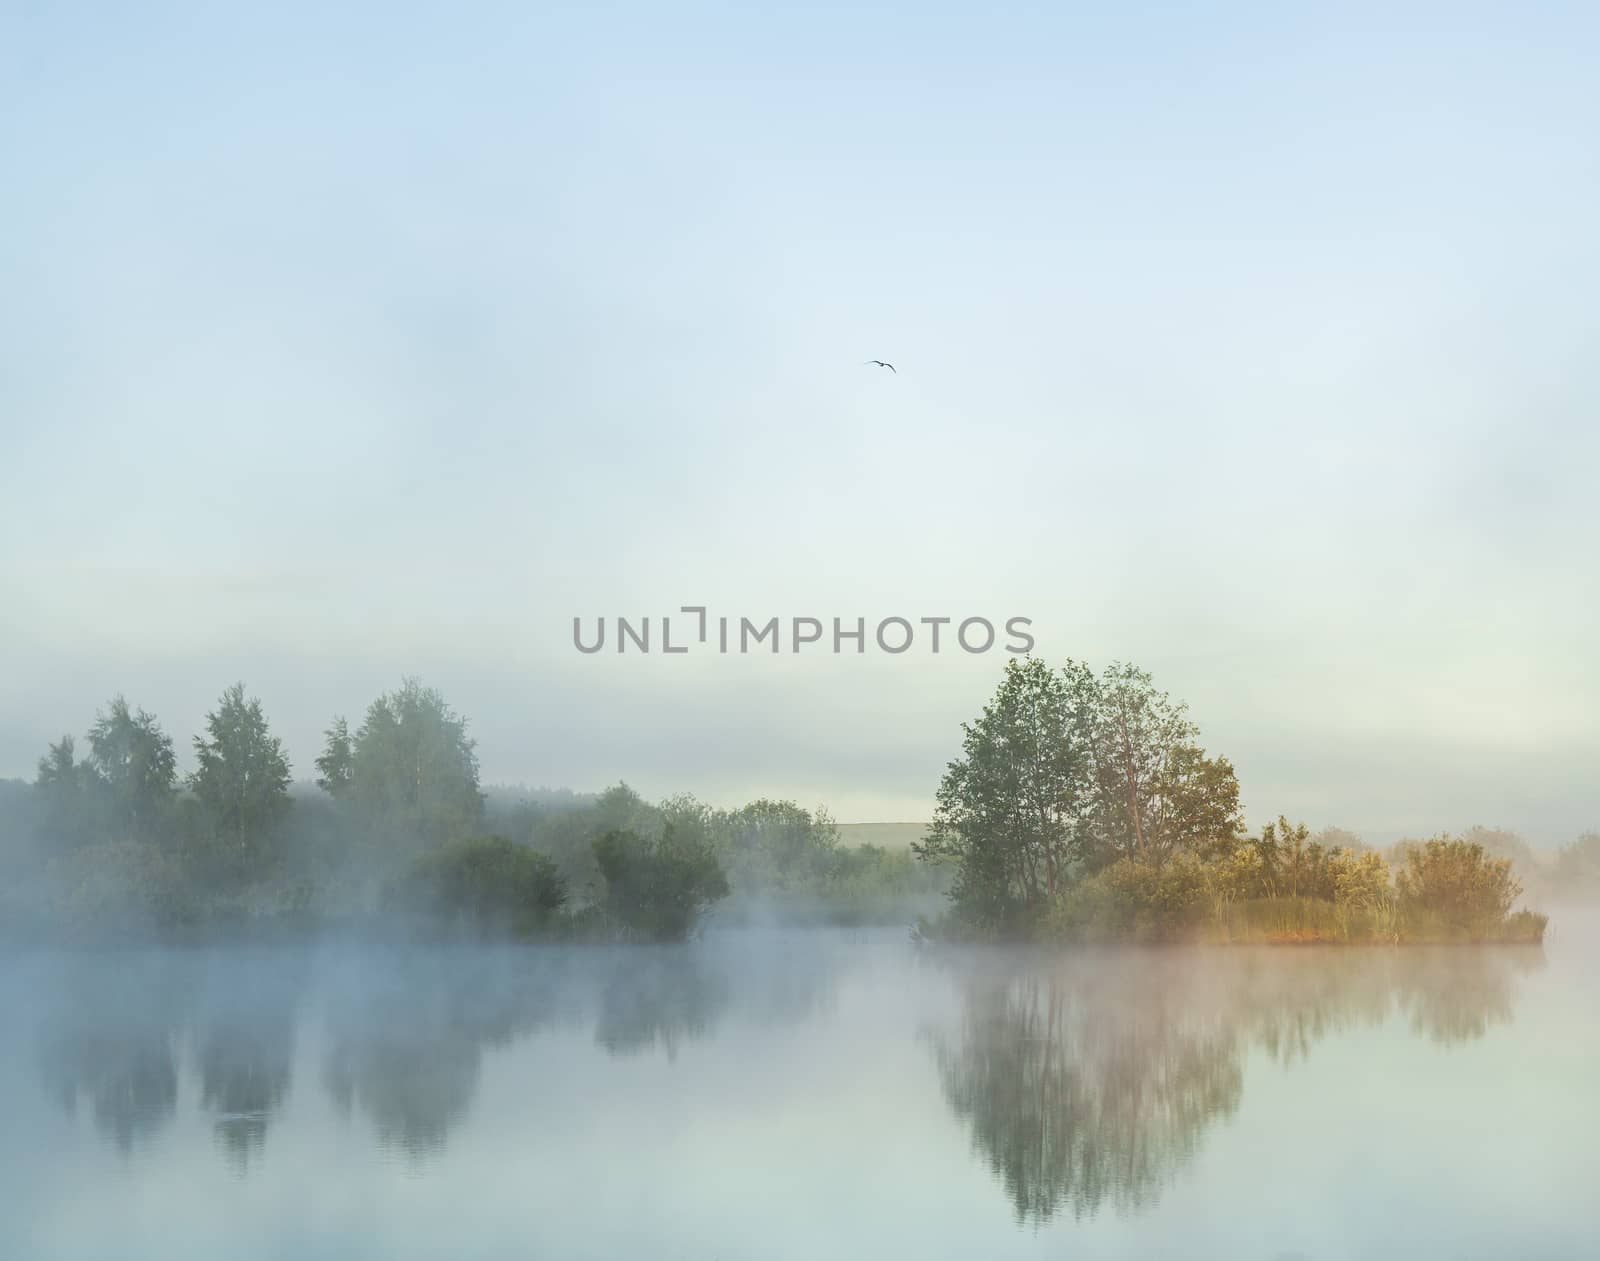 River before sunrise in the fog in the countryside